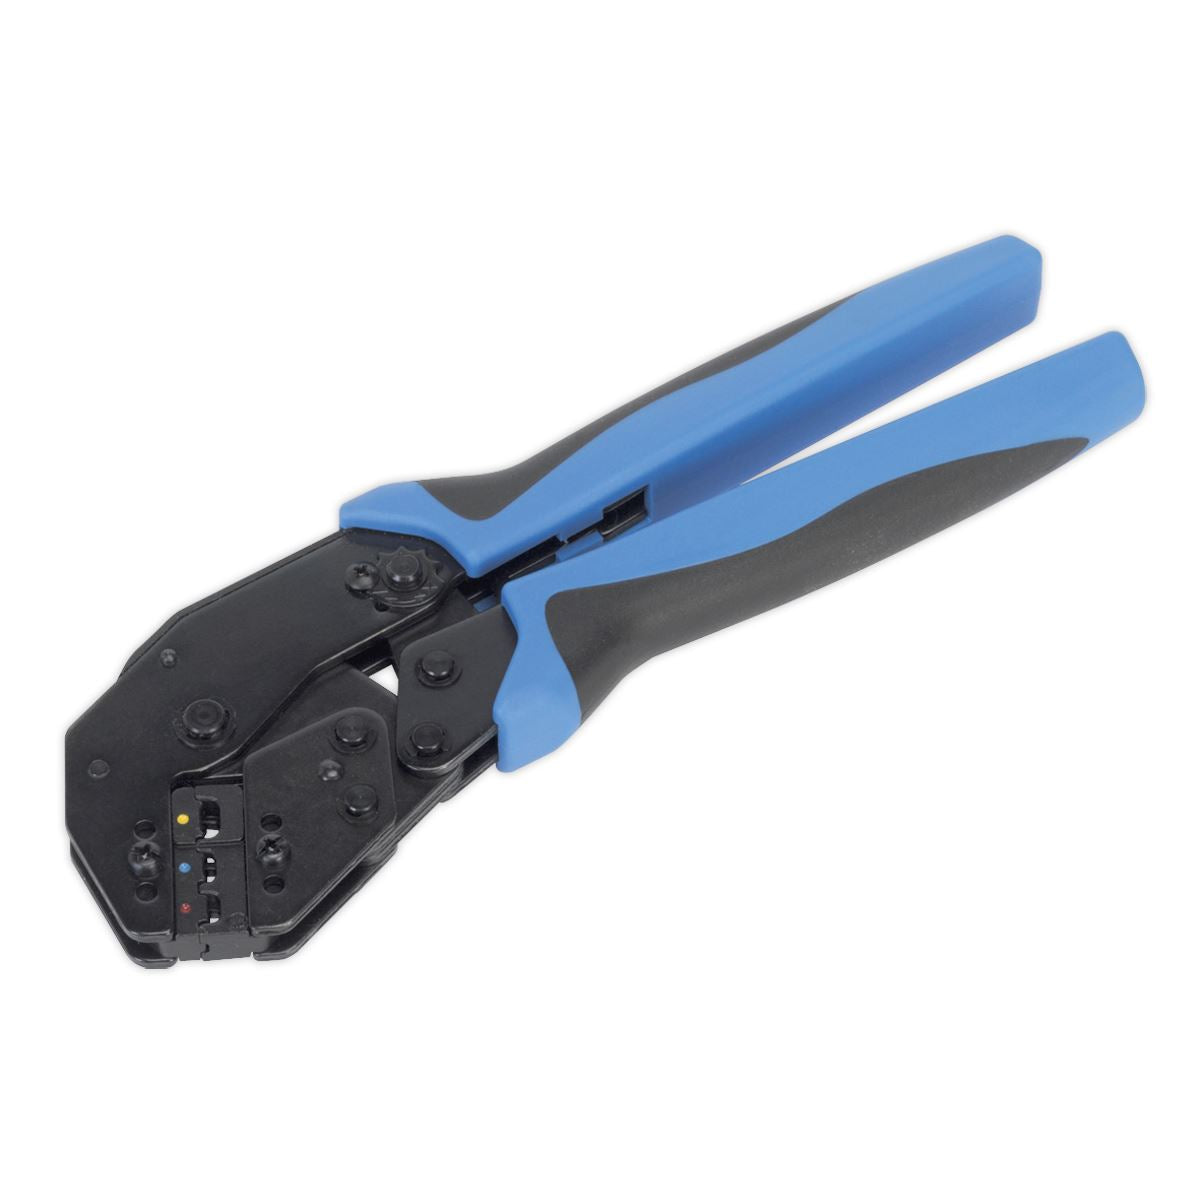 Sealey Ratchet Crimping Tool Angled Head Insulated Terminals